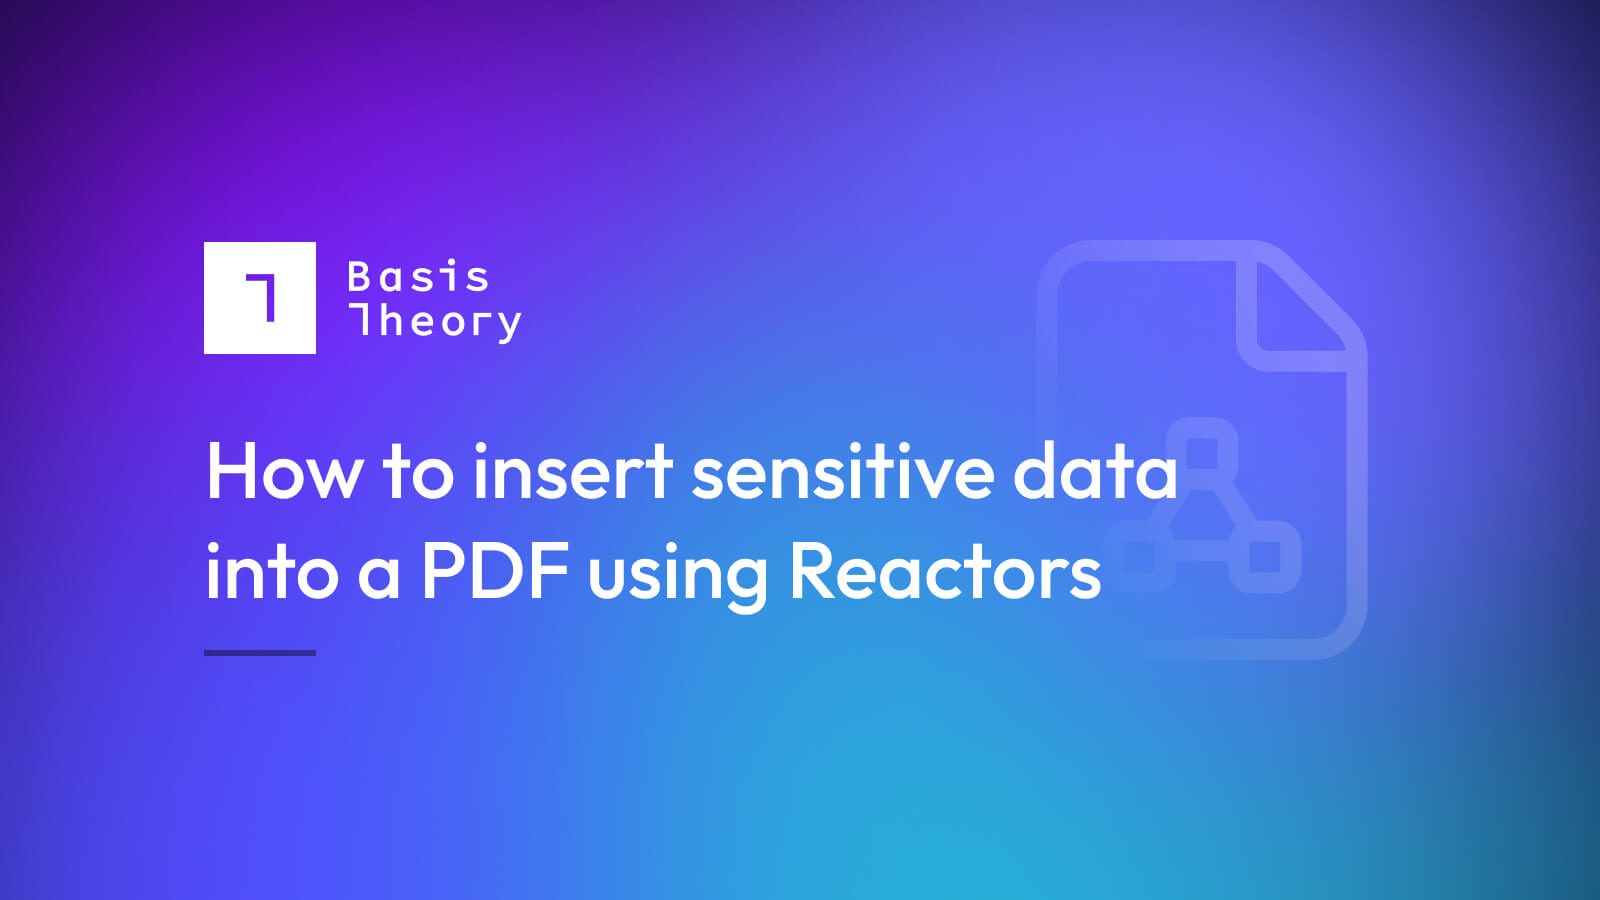 how to insert sensitive data into PDFs